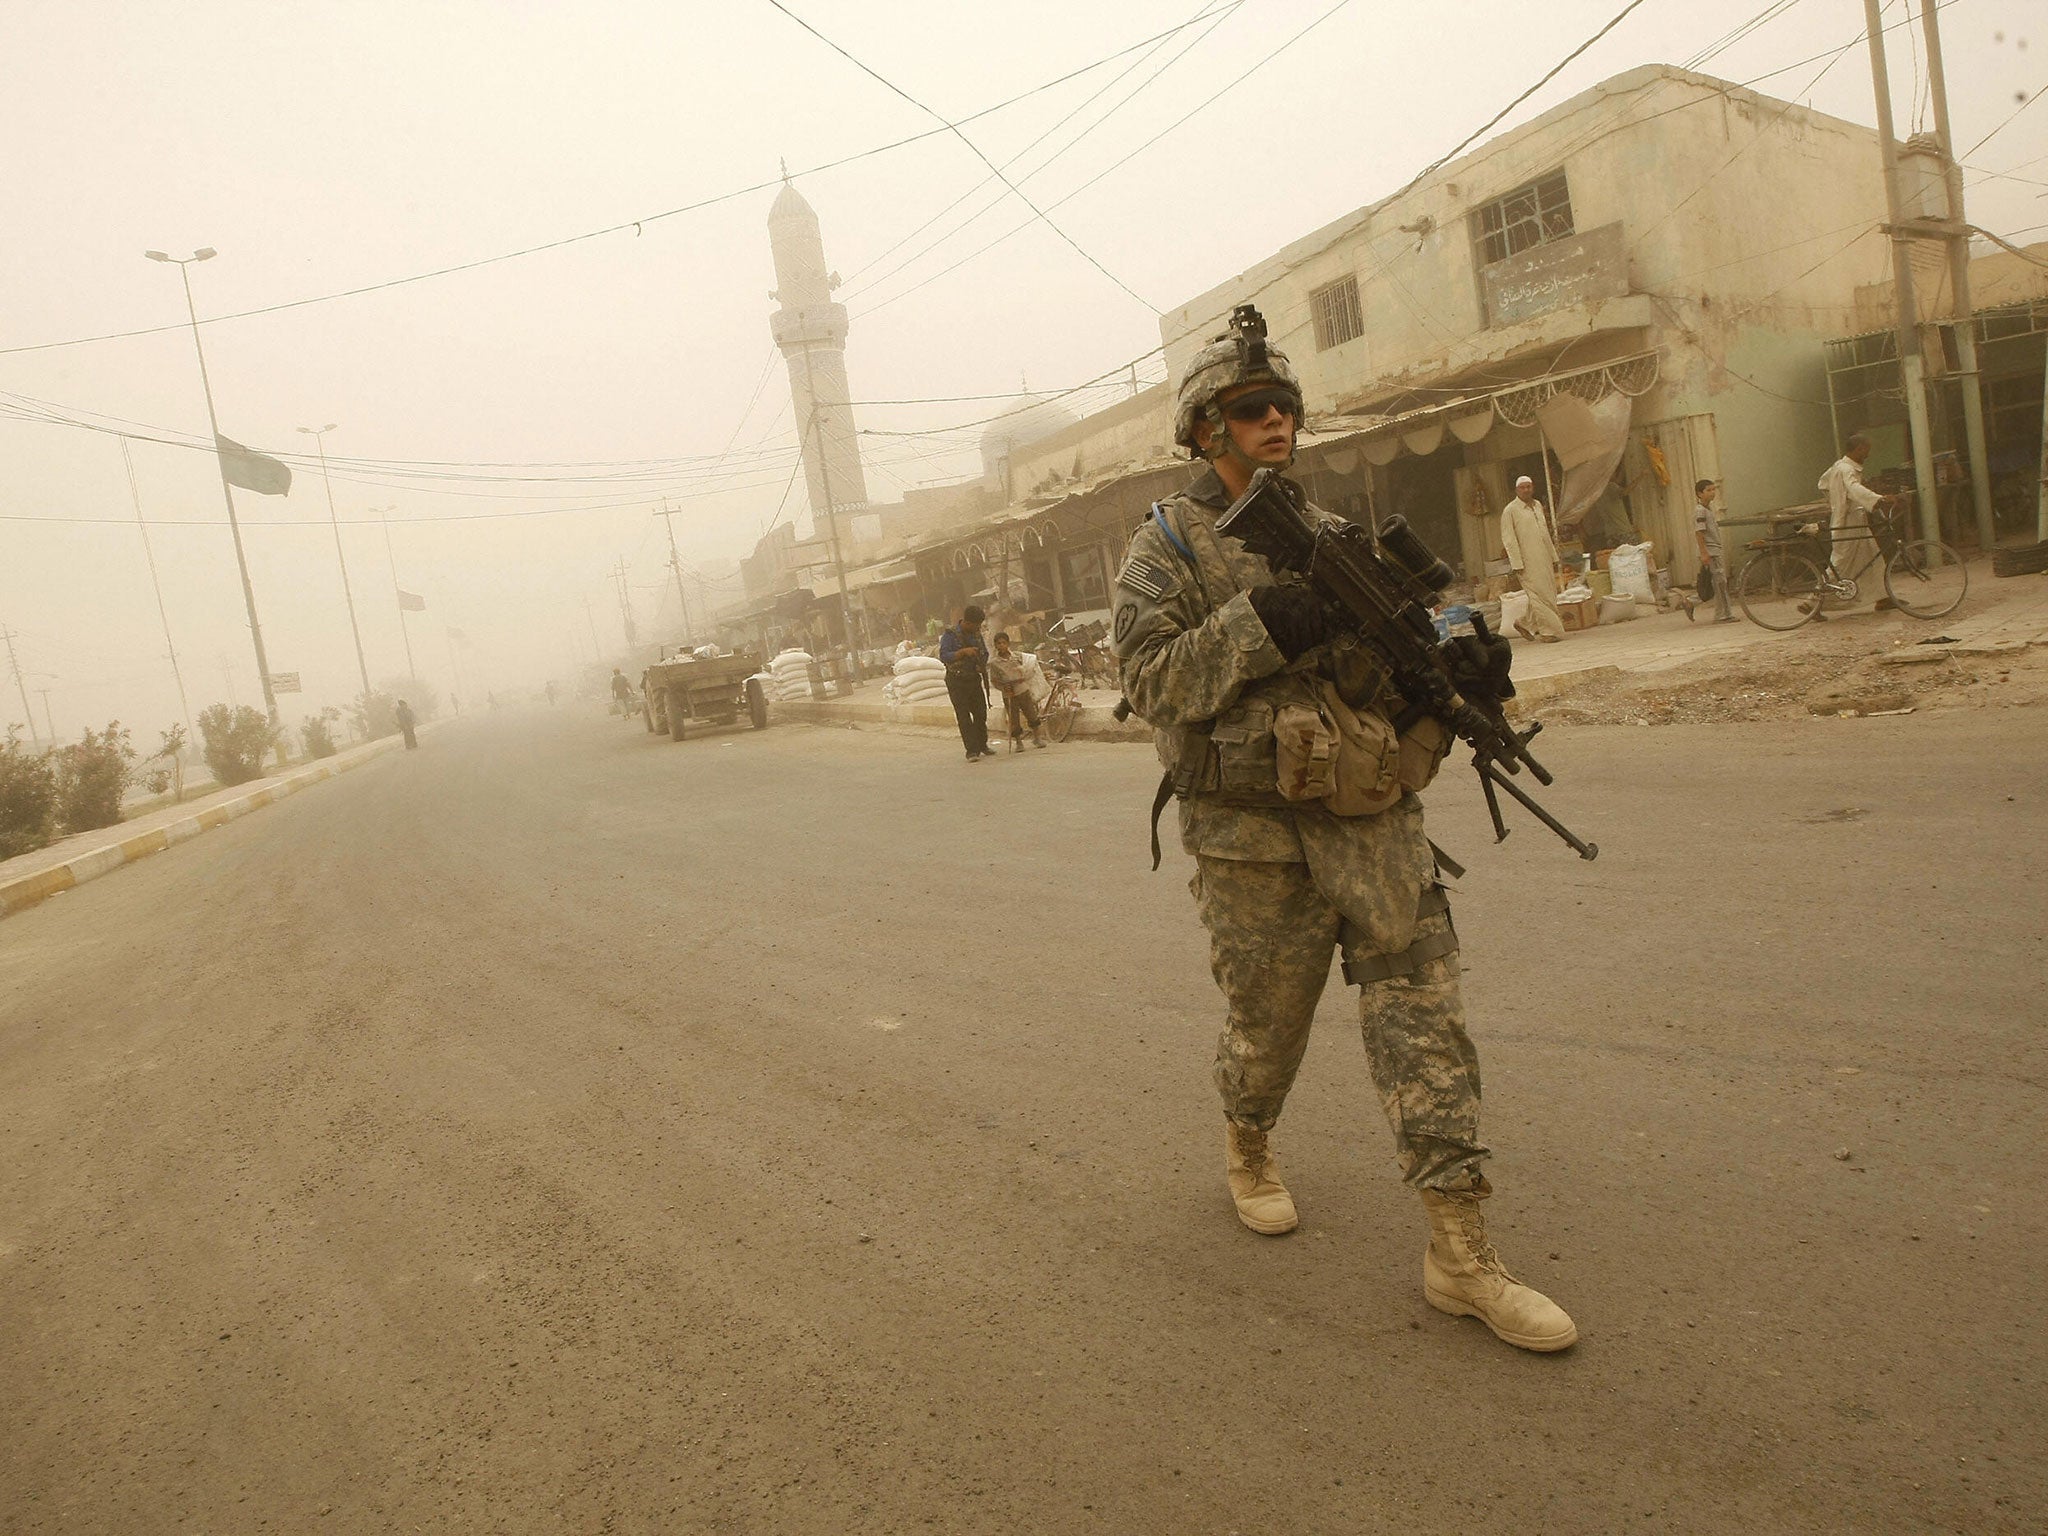 US soldiers and Iraqi police take part in their last joint patrol in Khan Bani Saad, some 10 kms south of the town of Baquba, on June 28 2009, as a sandstorm engulfs this northeastern region of the county. US combat troops will pull out from Iraq's cities